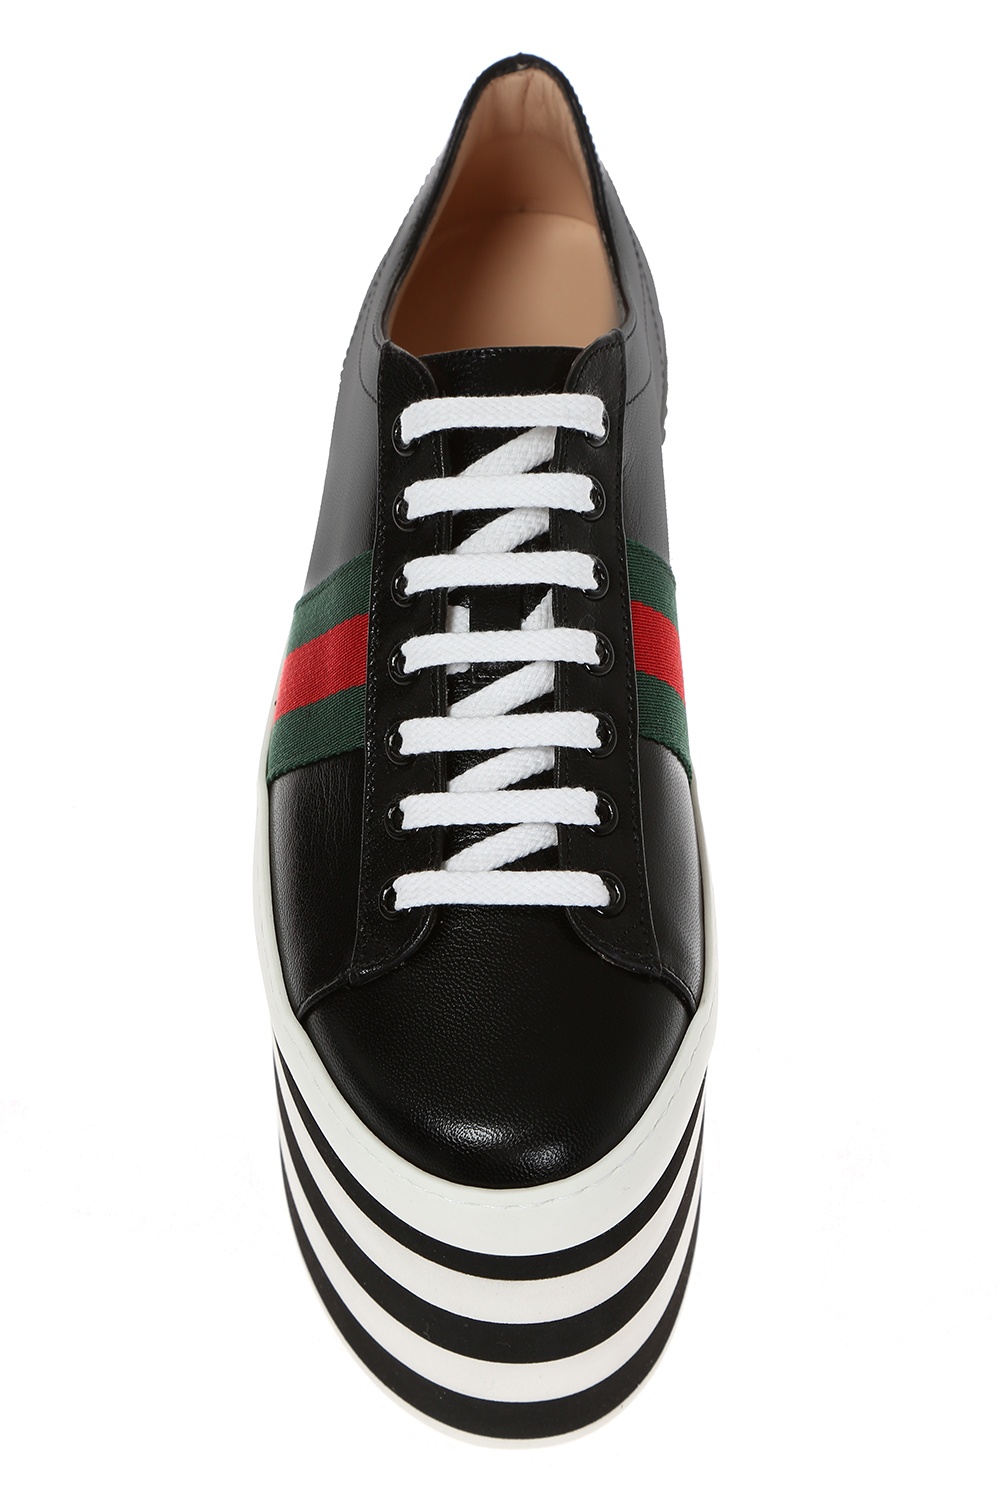 Gucci High platform sneakers | Shoes |